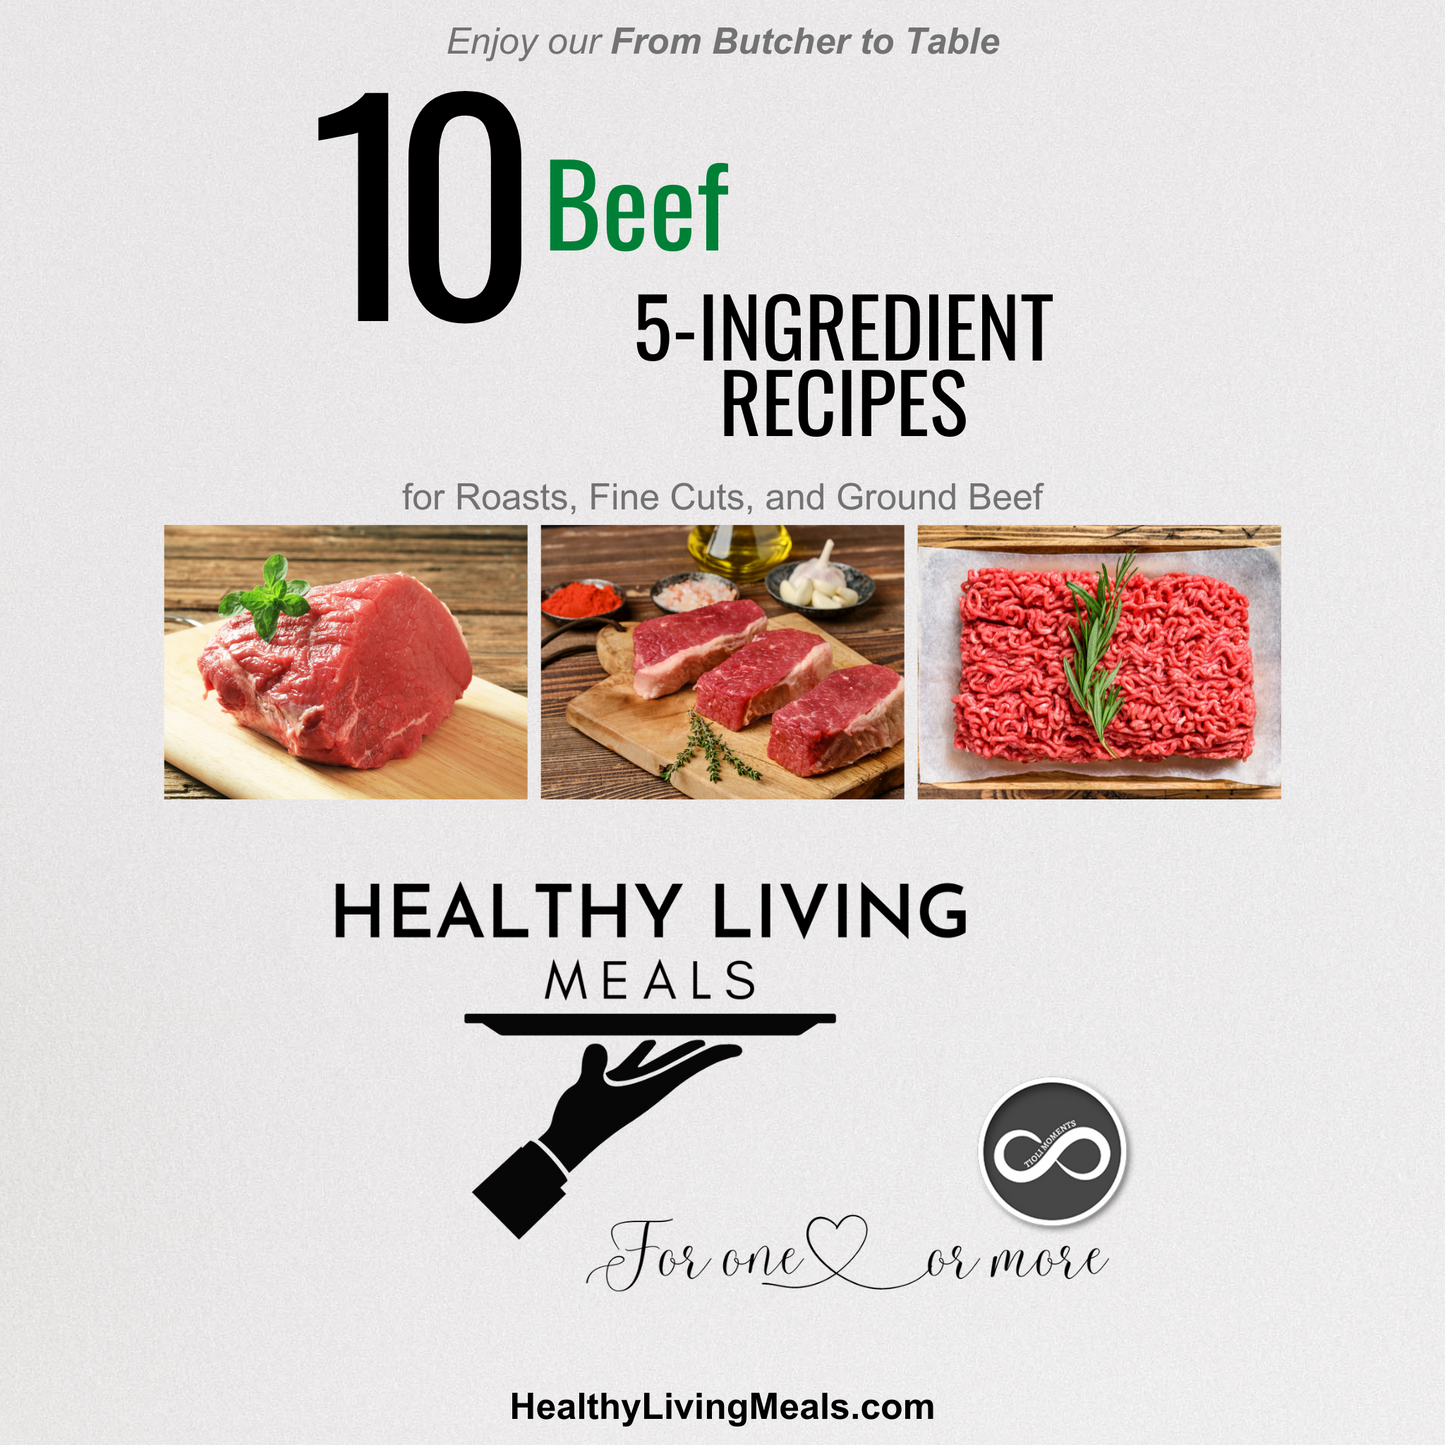 10 Beef Recipes | From Butcher to Table Series